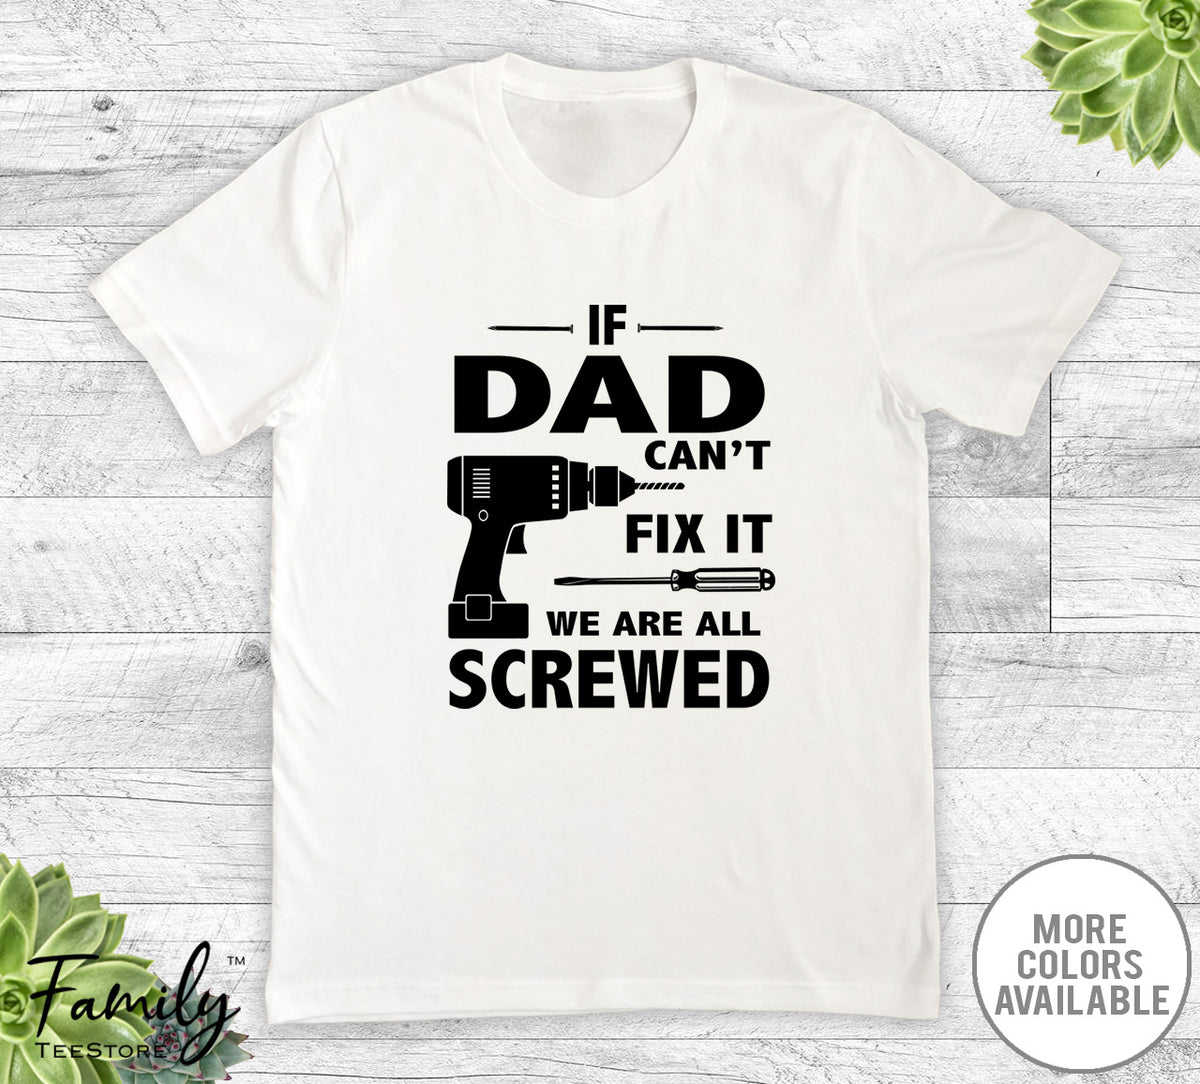 If Dad Can't Fix It We Are All Screwed - Unisex T-shirt - Dad Shirt - Dad Gift - familyteeprints